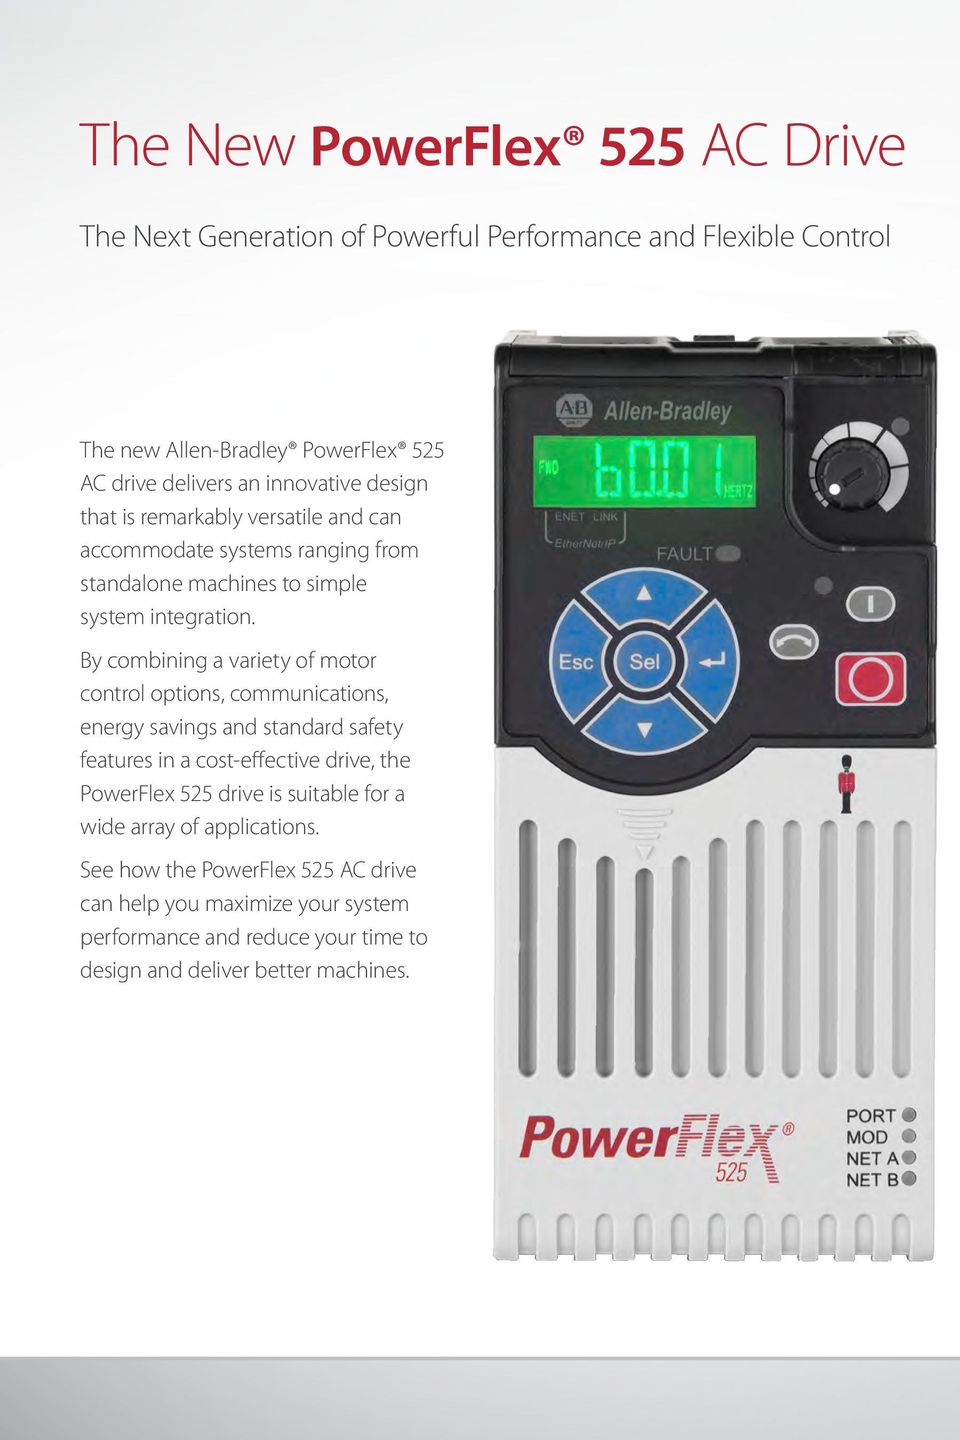 By combining a variety of motor control options, communications, energy savings and standard safety features in a cost-effective drive, the PowerFlex 525 drive